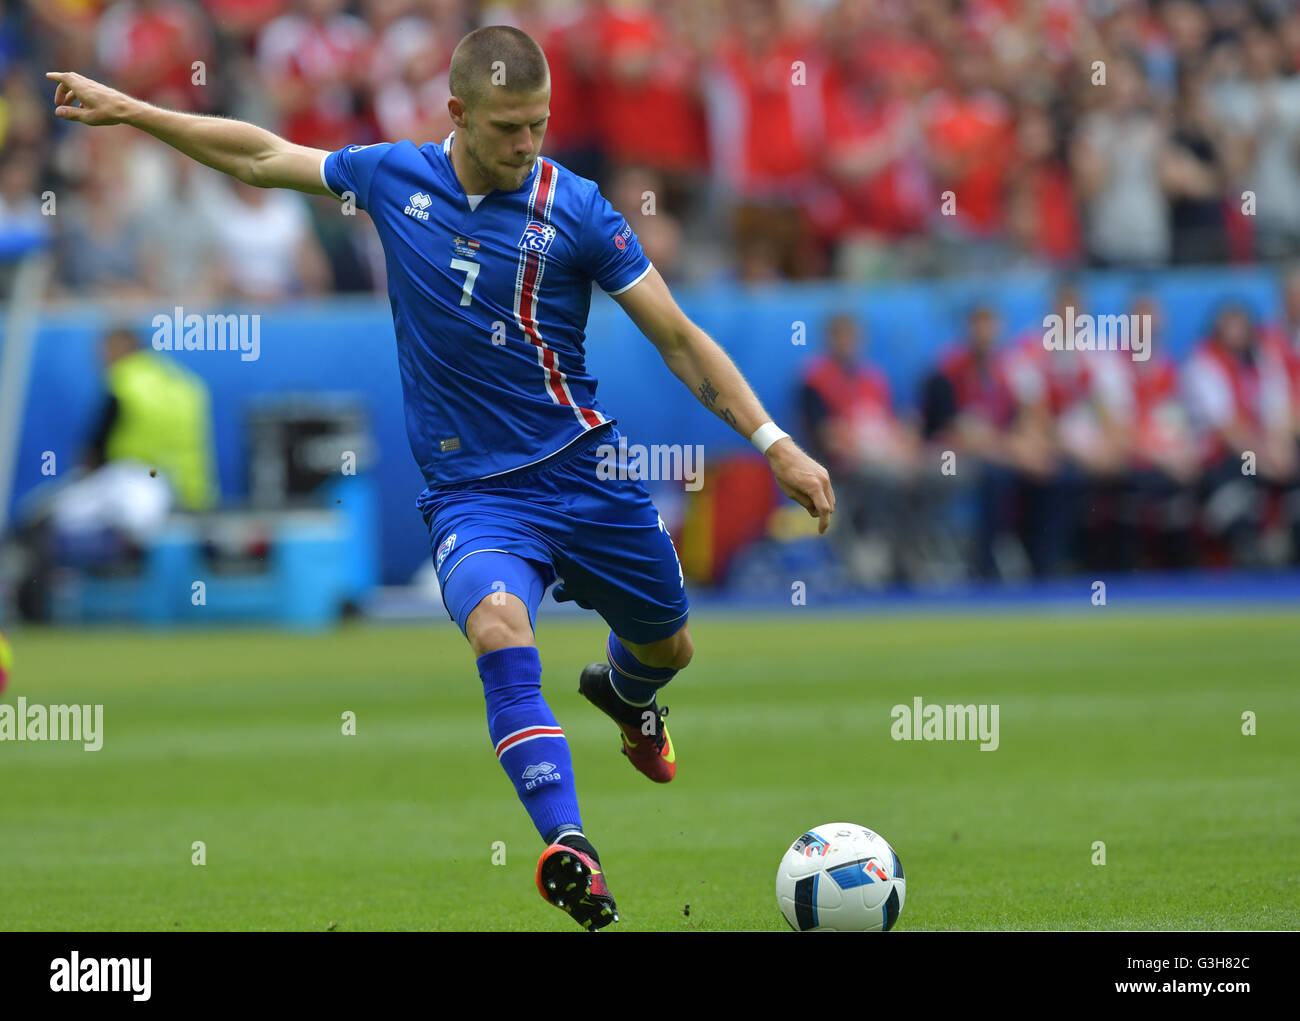 St. Denis, France. 22nd June, 2016. Iceland's Johann Berg Gudmundsson tries to score during the Group F preliminary round soccer match of the UEFA EURO 2016 between Iceland and Austria at the Stade de France in St. Denis, France, 22 June 2016. Photo: Peter Kneffel/dpa/Alamy Live News Stock Photo